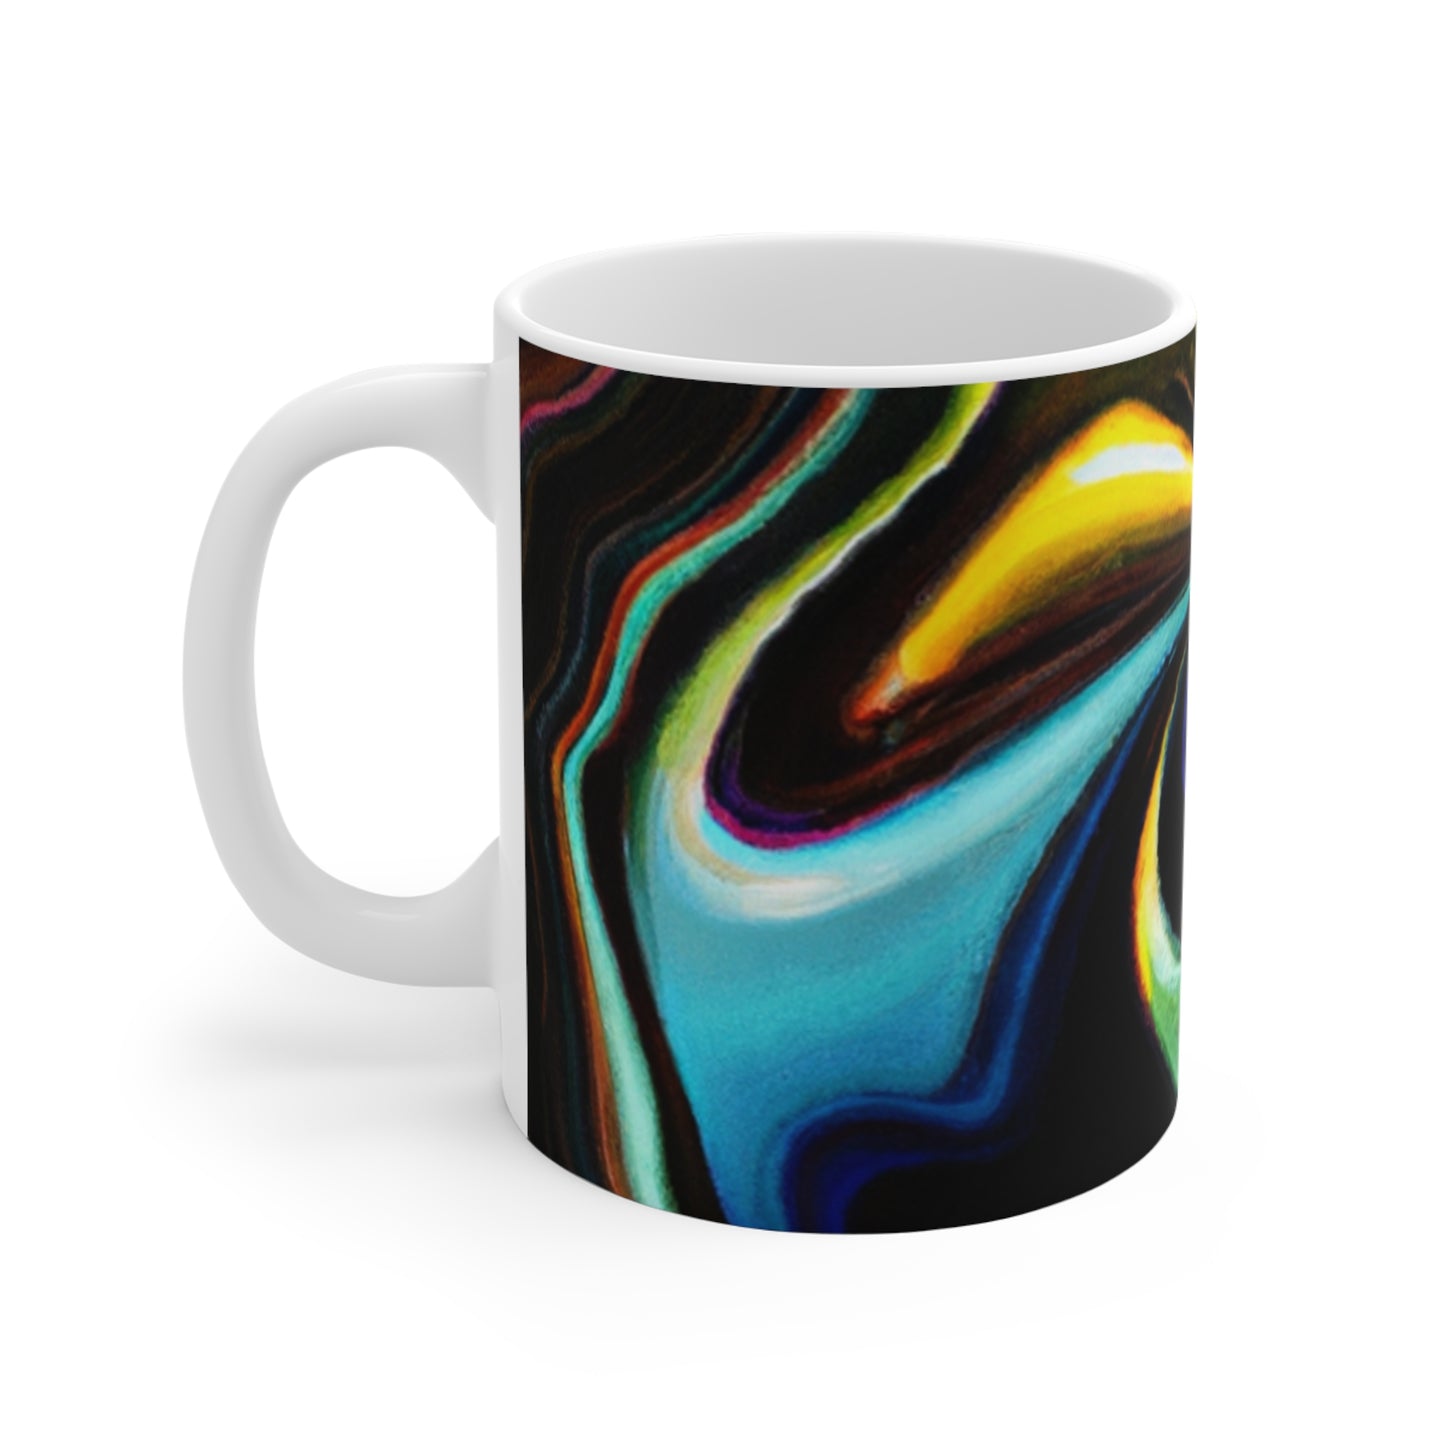 Ferdinand's Finest Friends Coffee - Psychedelic Coffee Cup Mug 11 Ounce